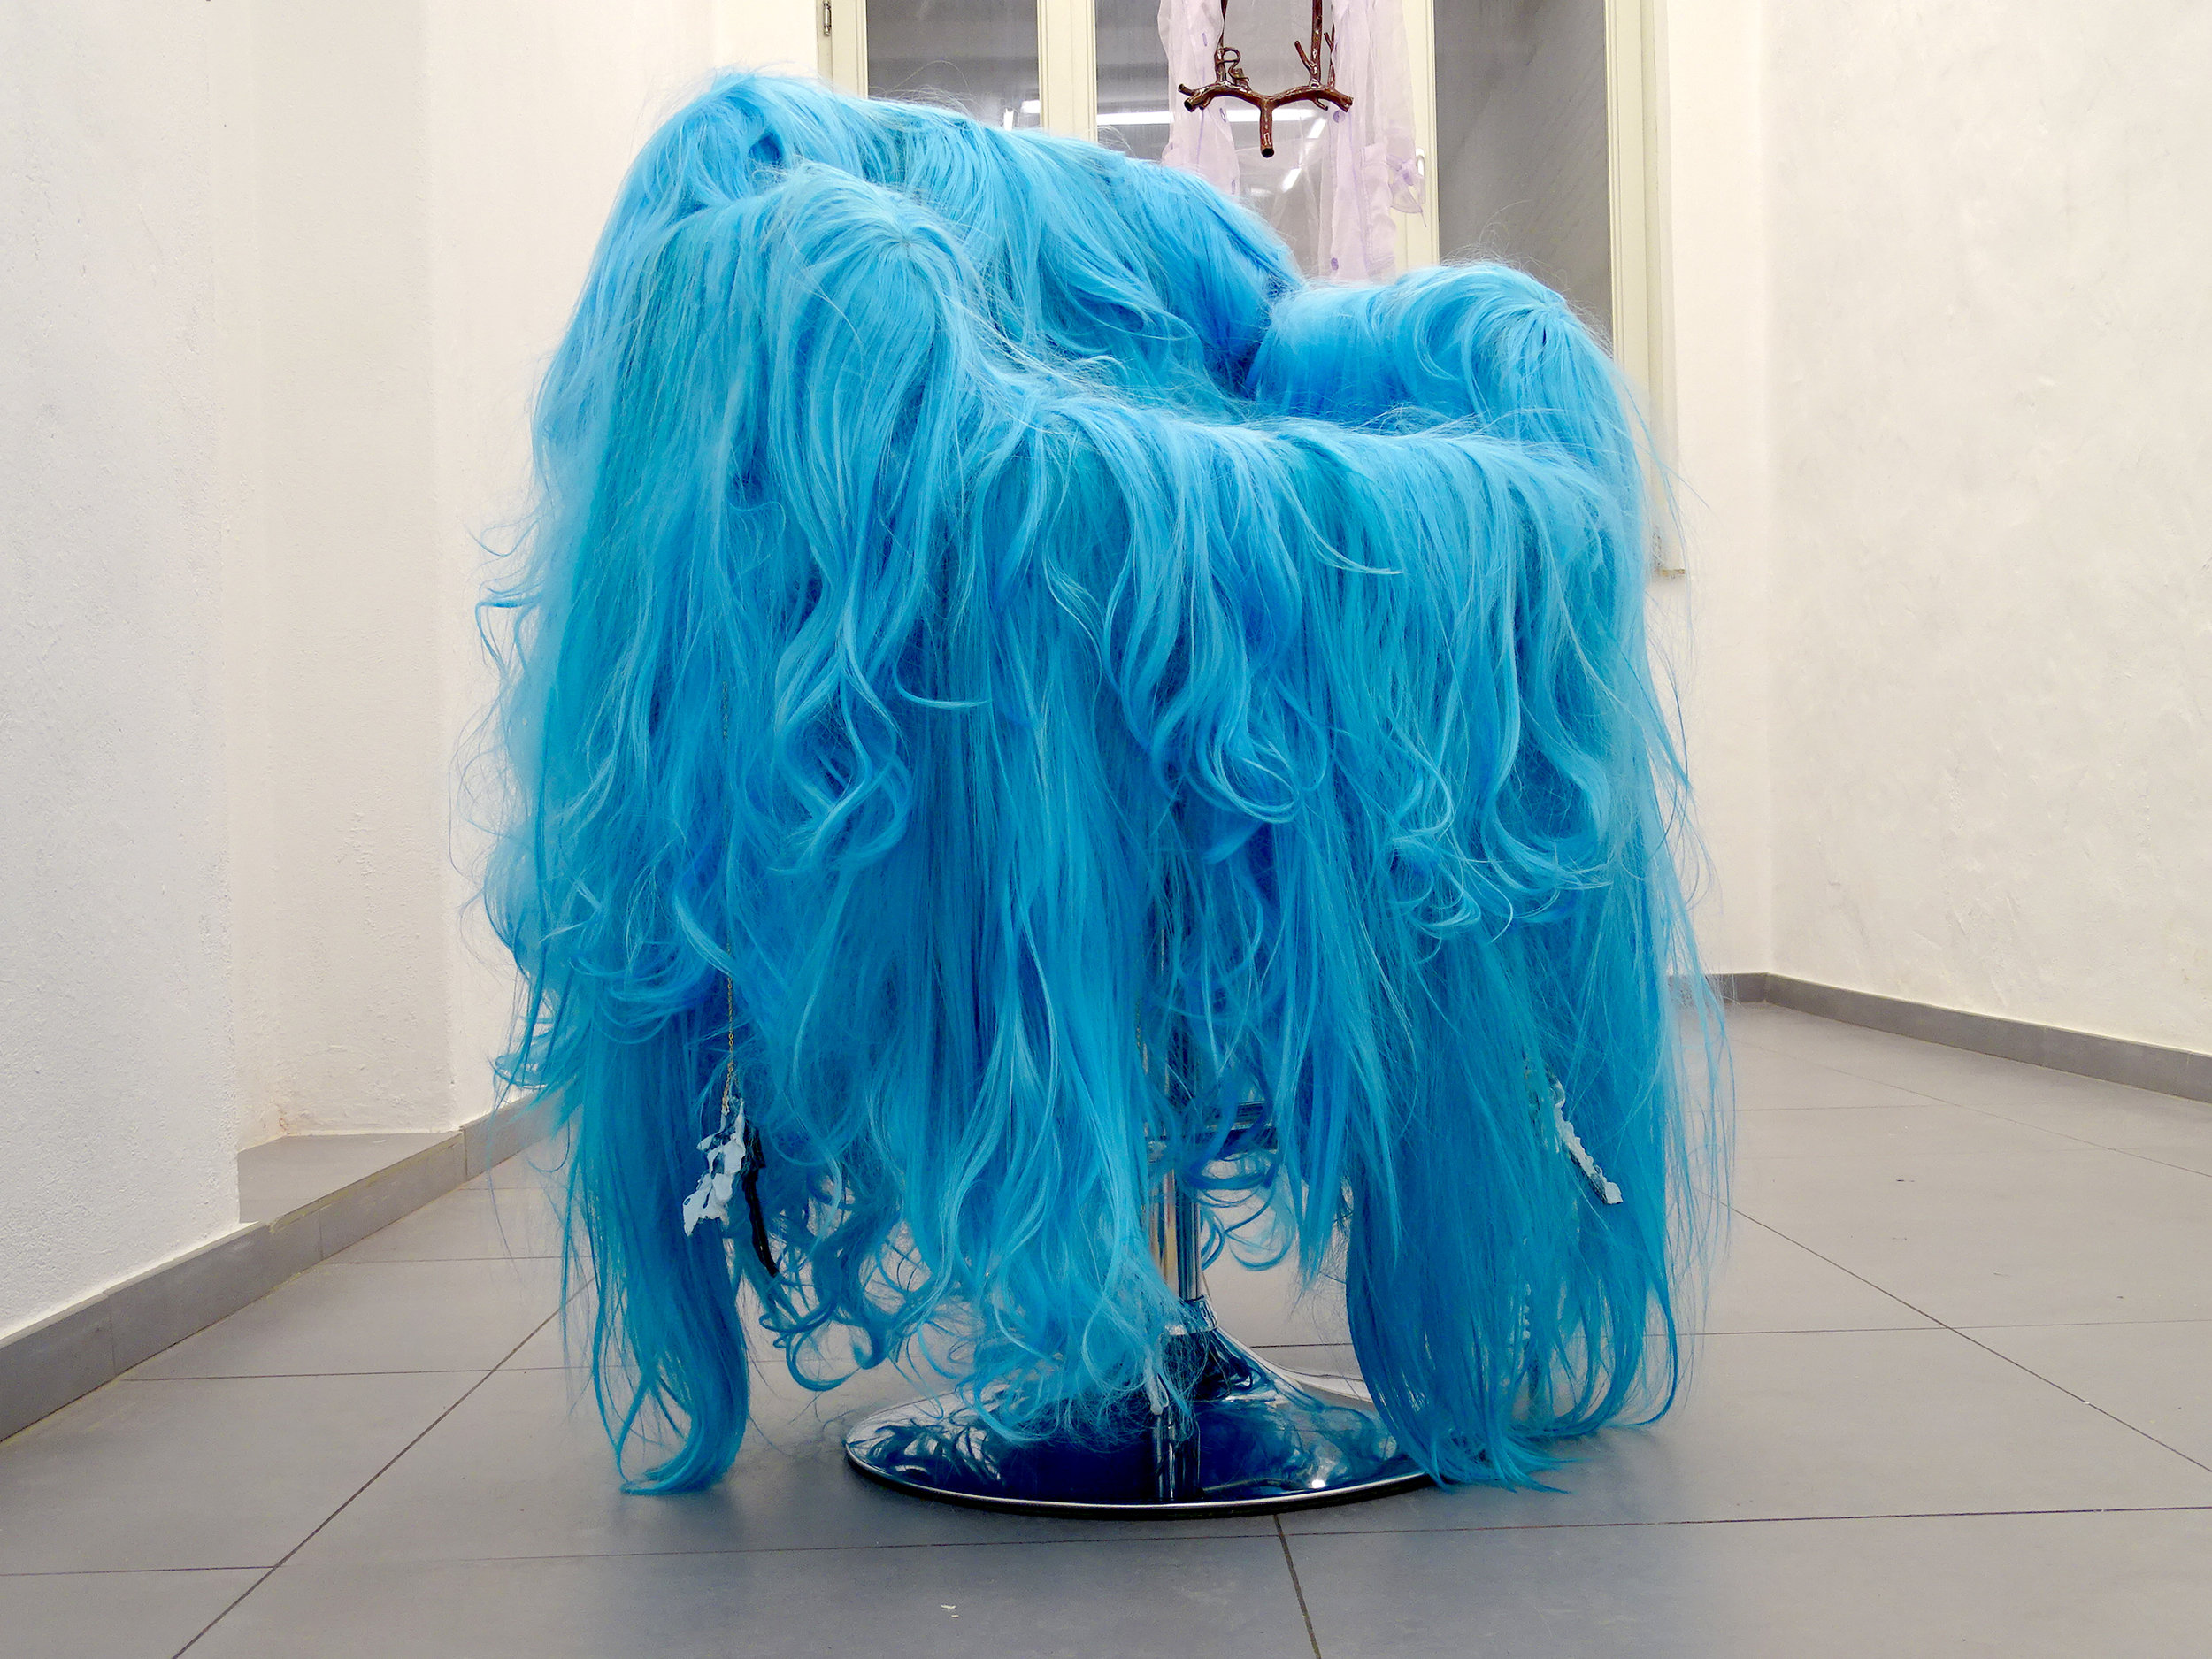 (10) Of All the Things I’ve Lost Proudick (Lindsey Mendick & Paloma Proudfoot) Hannah Barry Gallery at Ballon Rouge Club, Brussels  Lindsey Mendick It's Only Hair, 2019 Synthetic hair, glazed ceramic, hairdresser’s -1.jpg